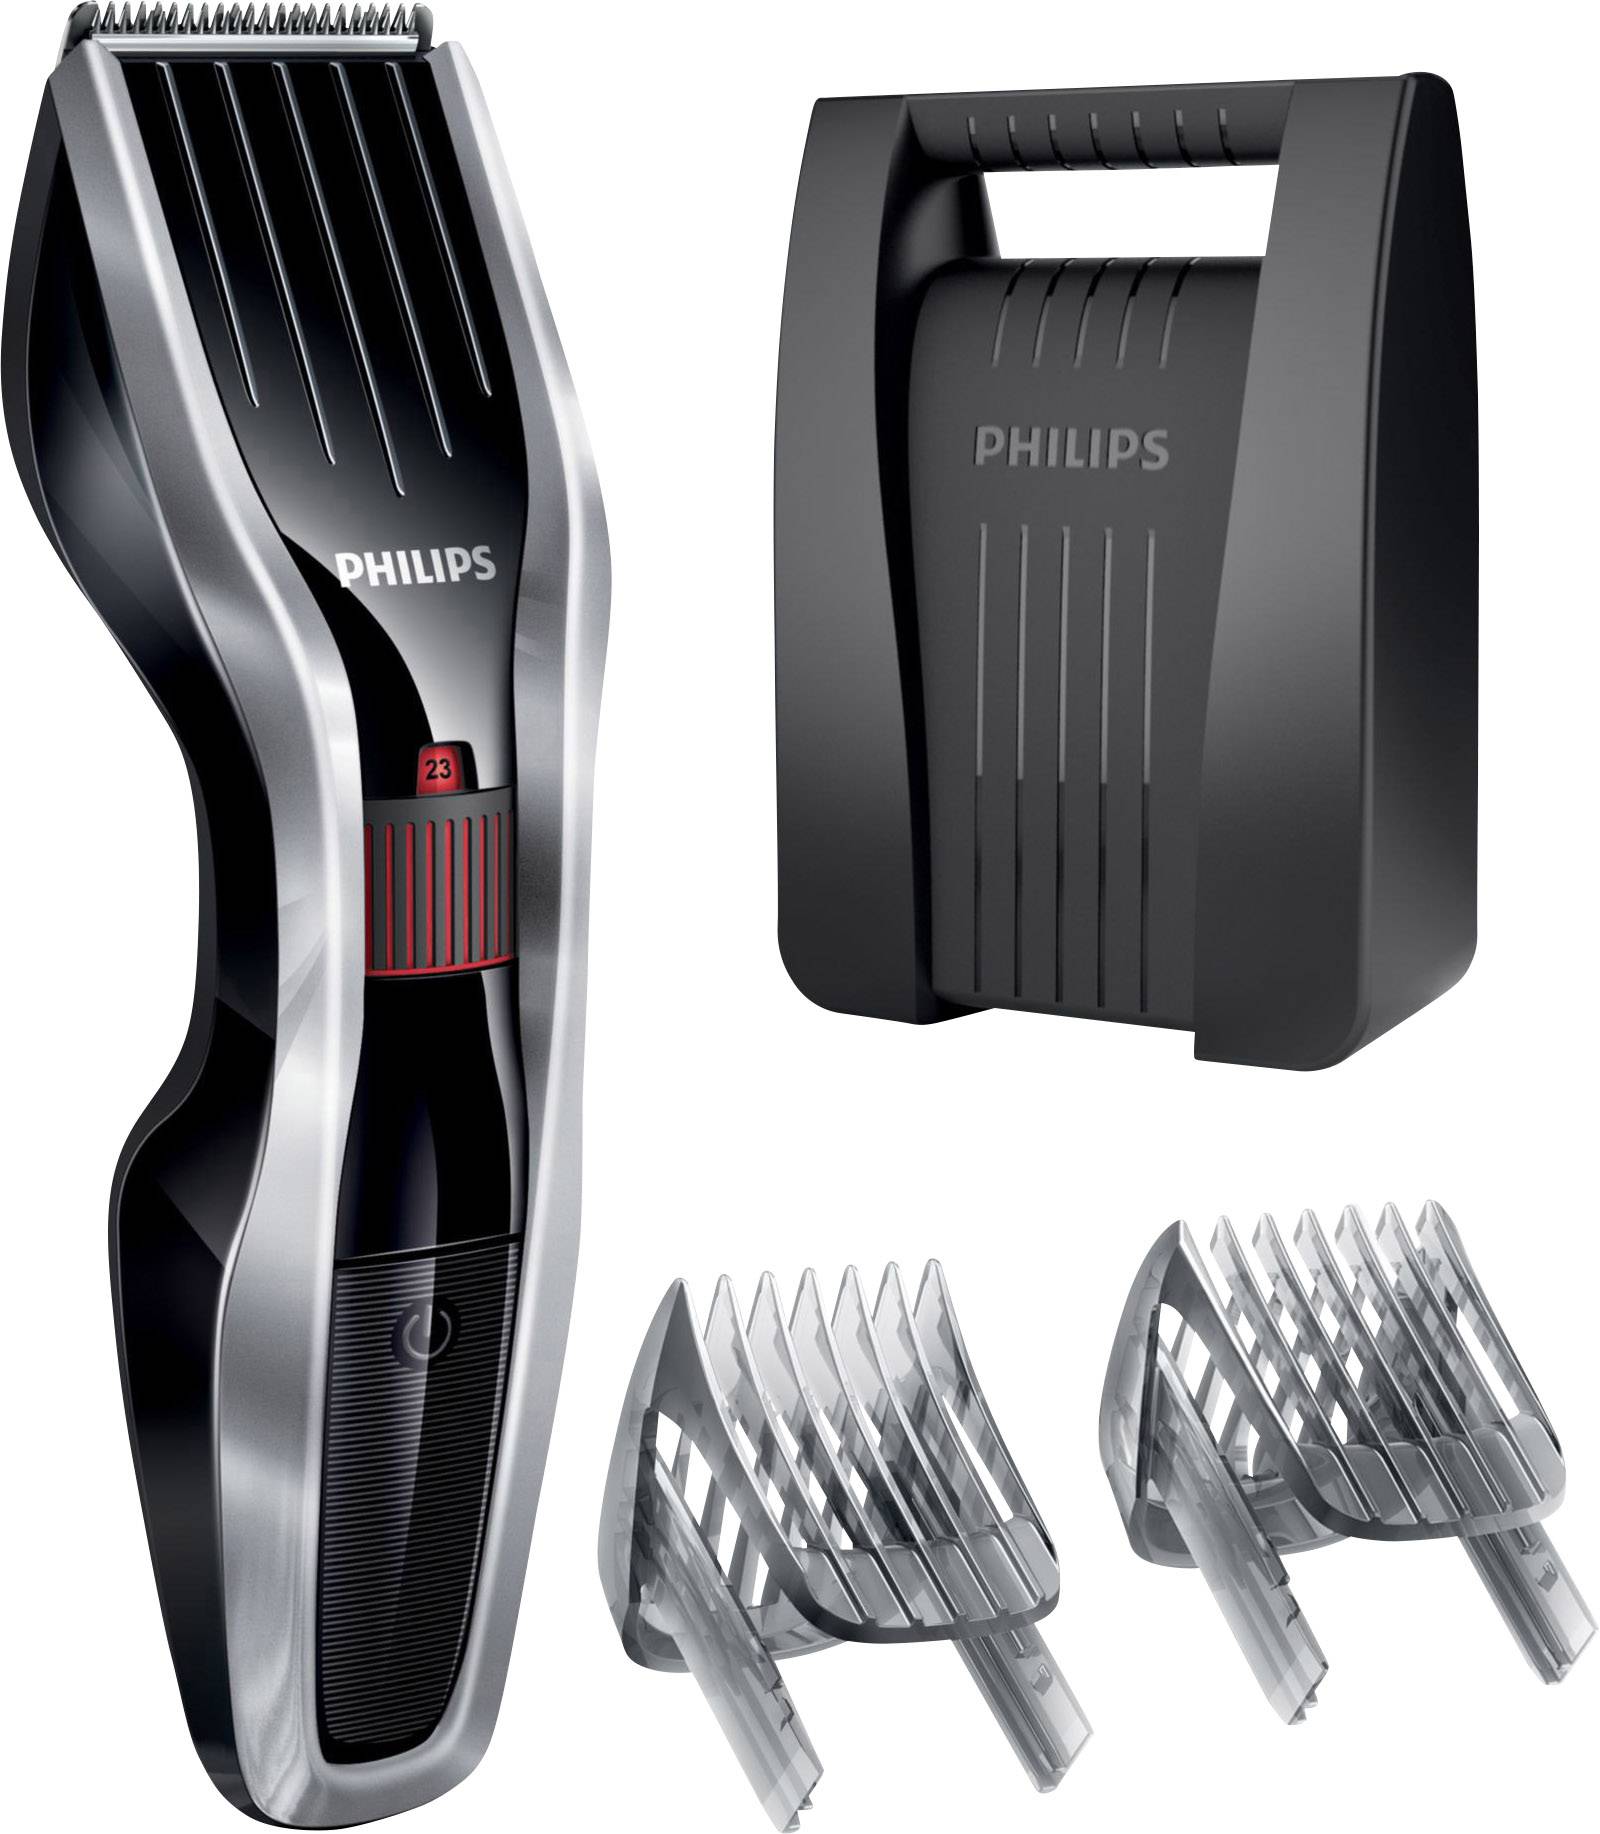 philips cuts twice as fast